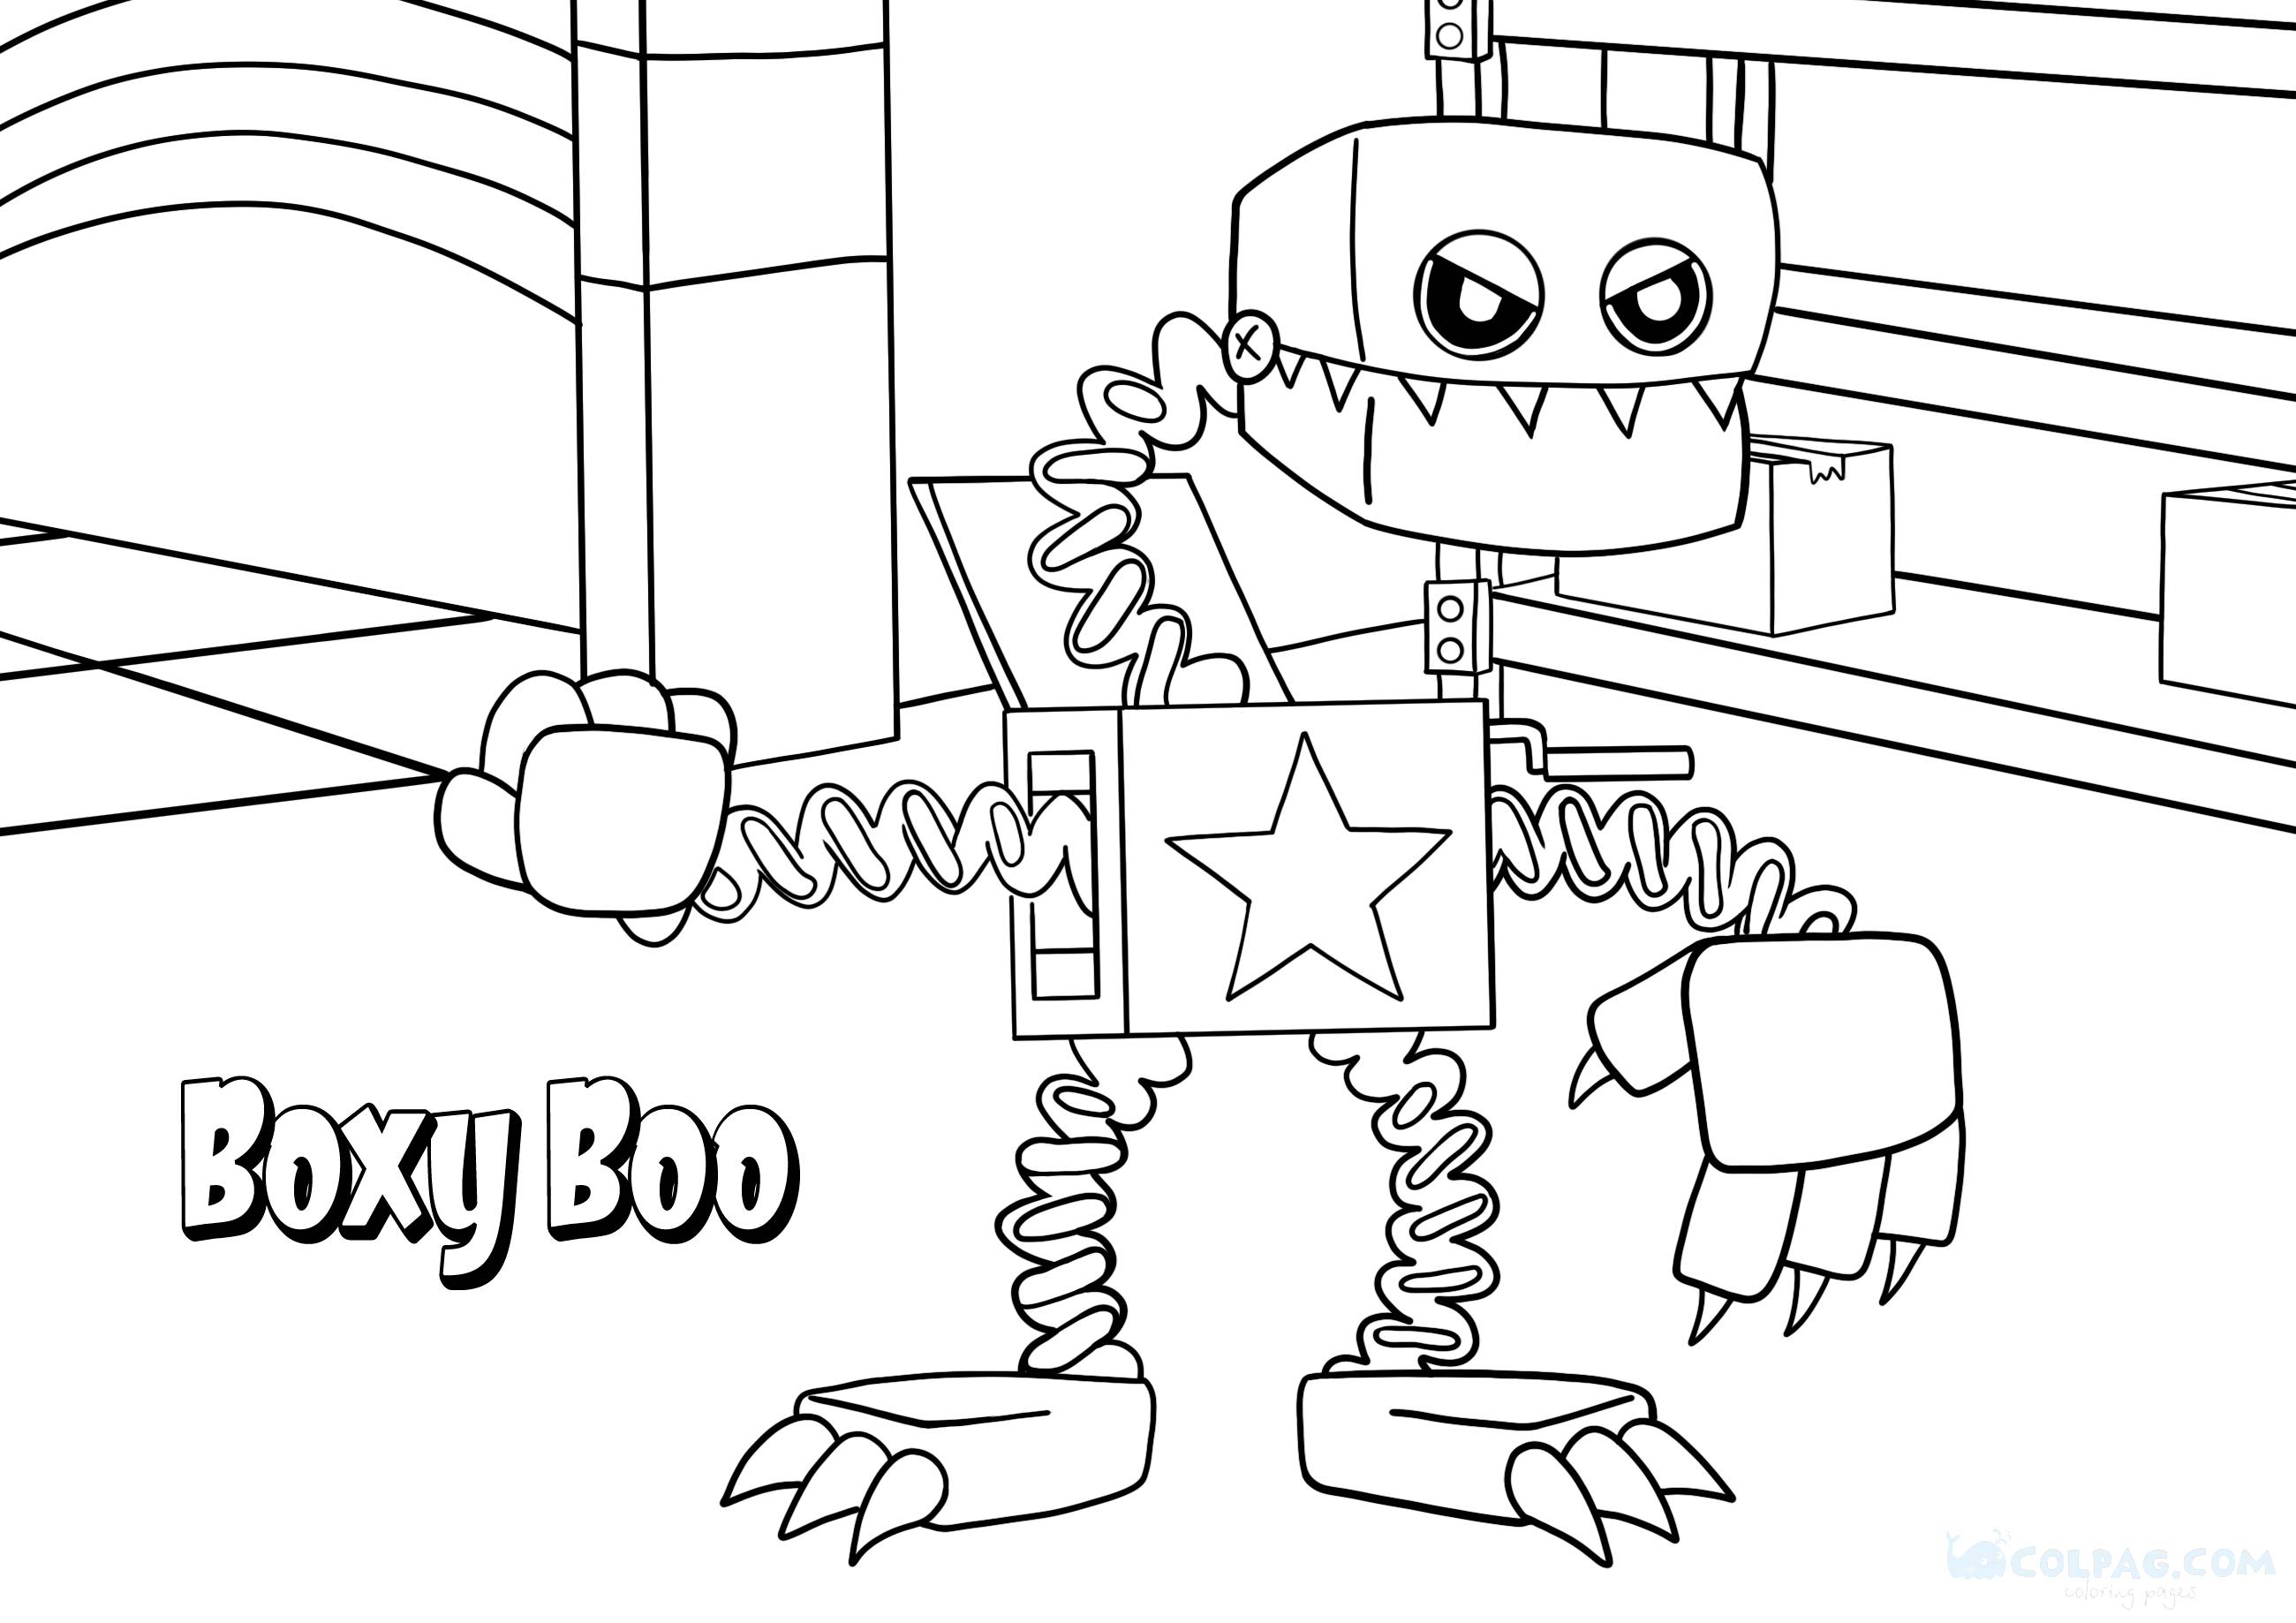 boxy-boo-project-playtime-coloring-page-colpag-com-1